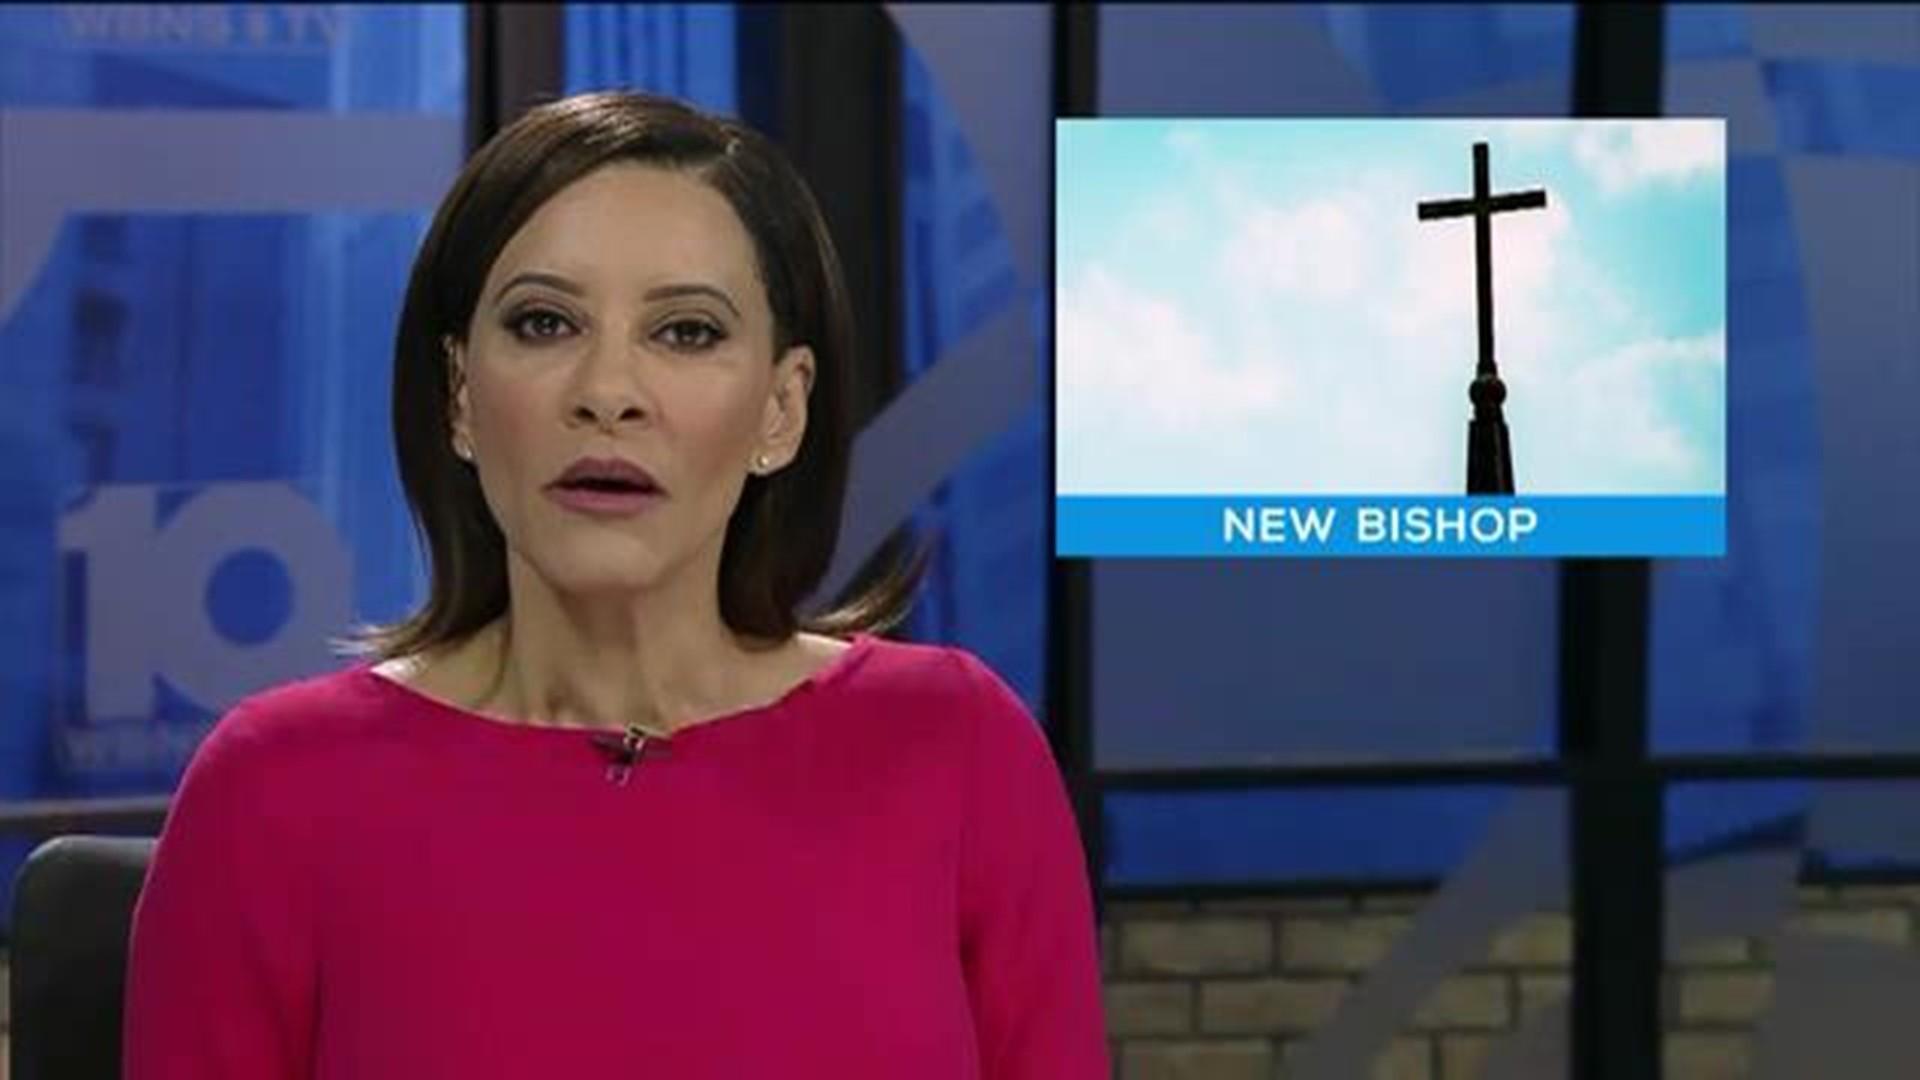 Diocese of Columbus welcomes new bishop as Pope calls for change